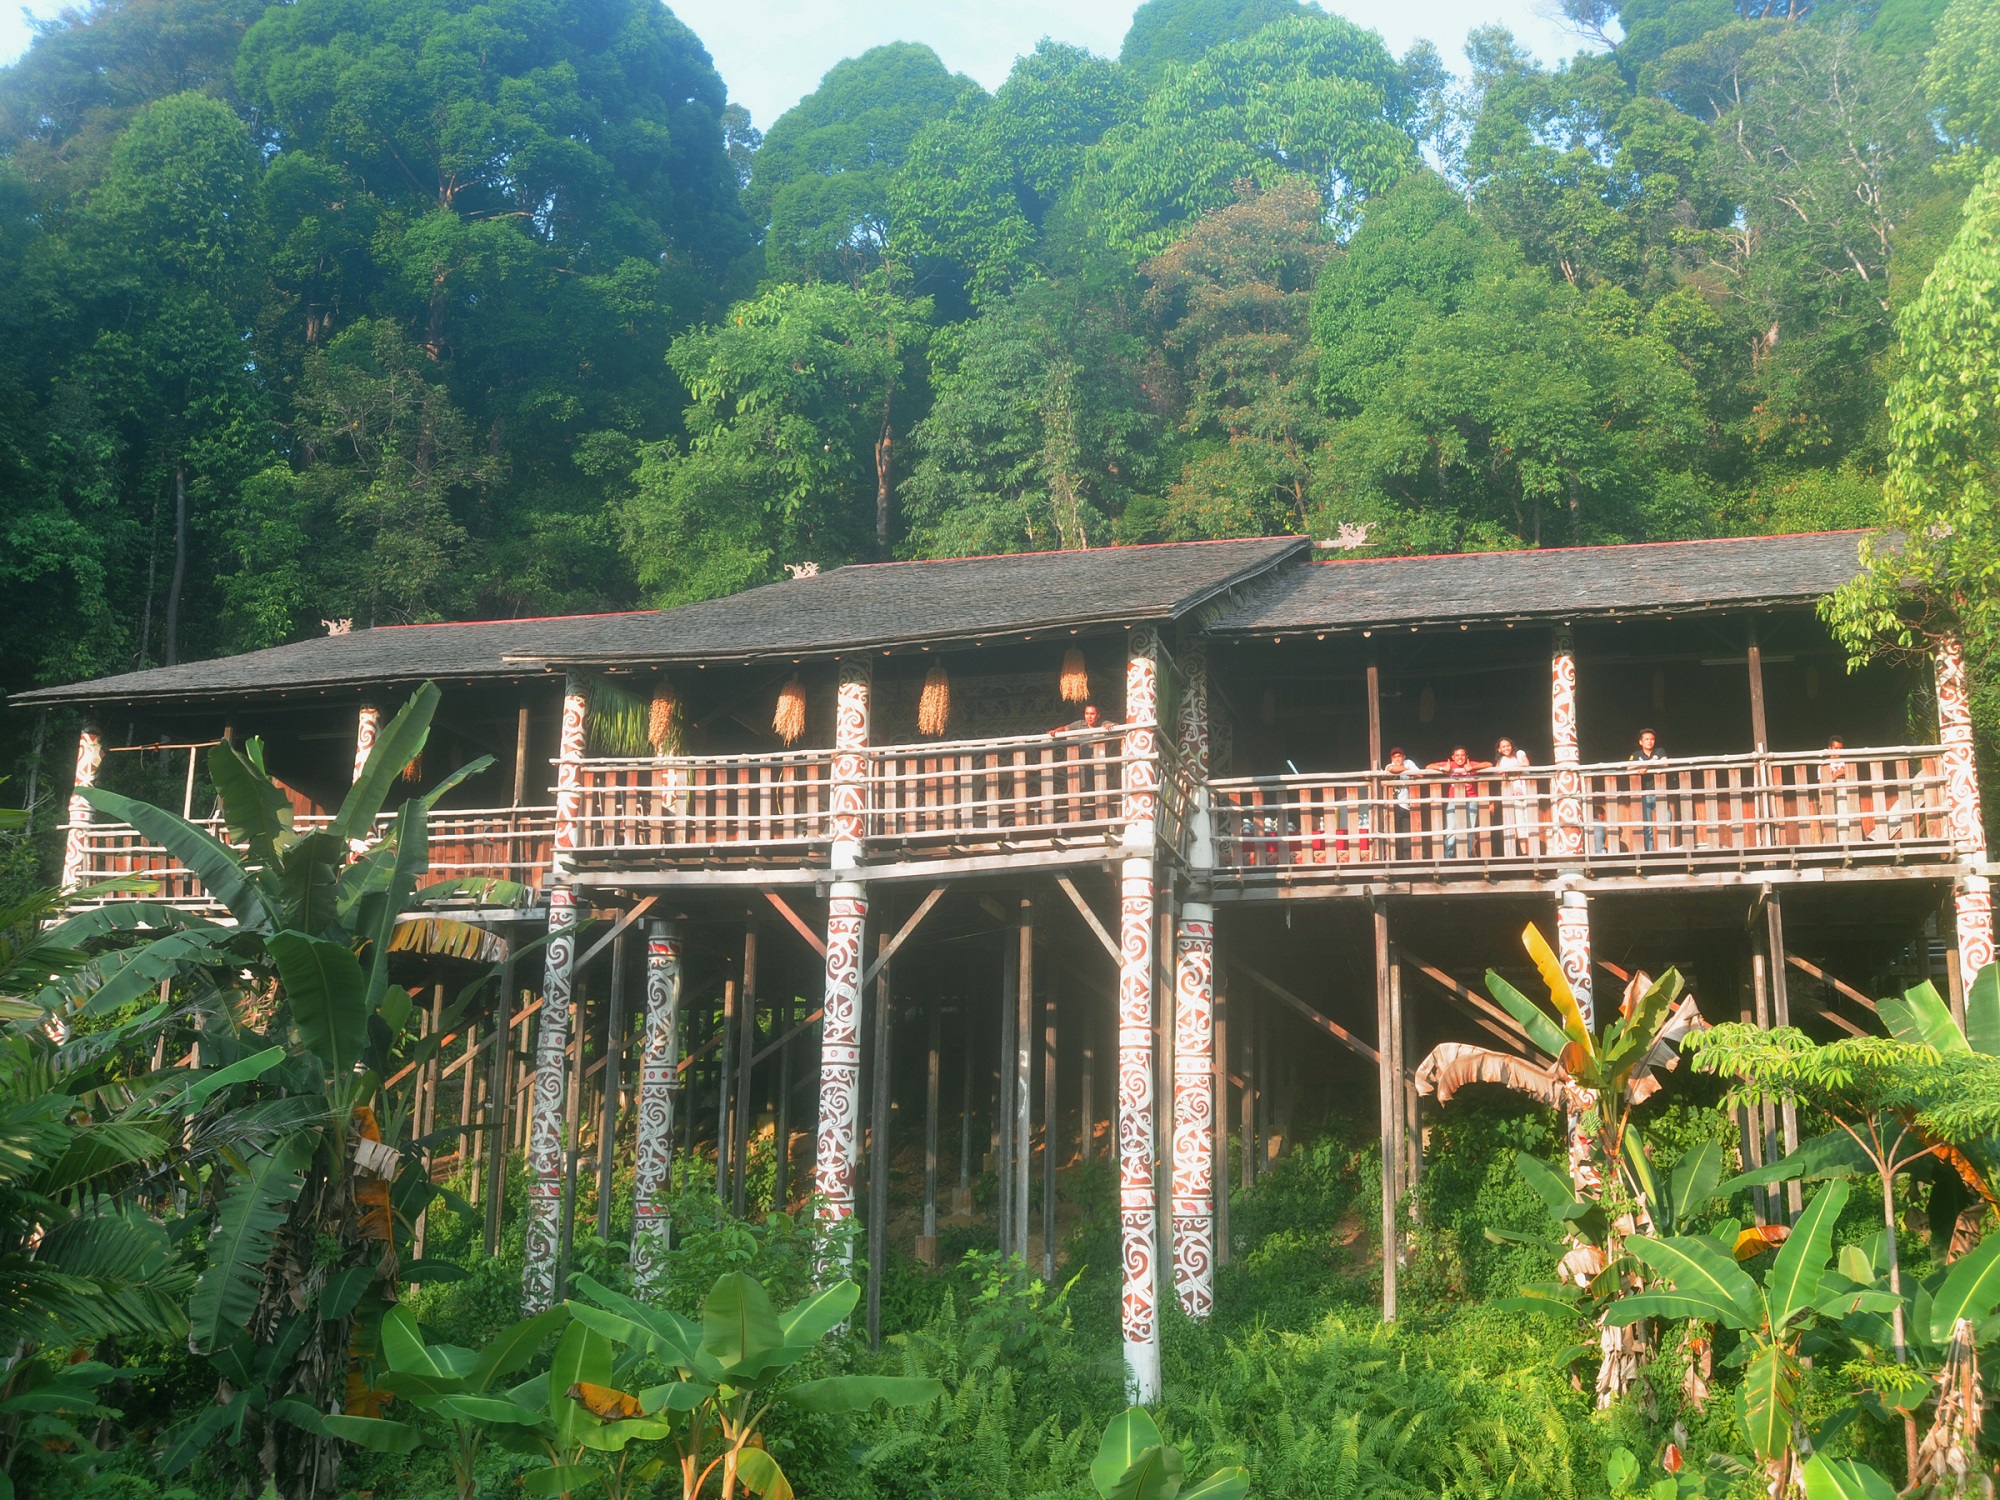 Where to go in Borneo - Stay in an Iban Longhouse in Sarawak